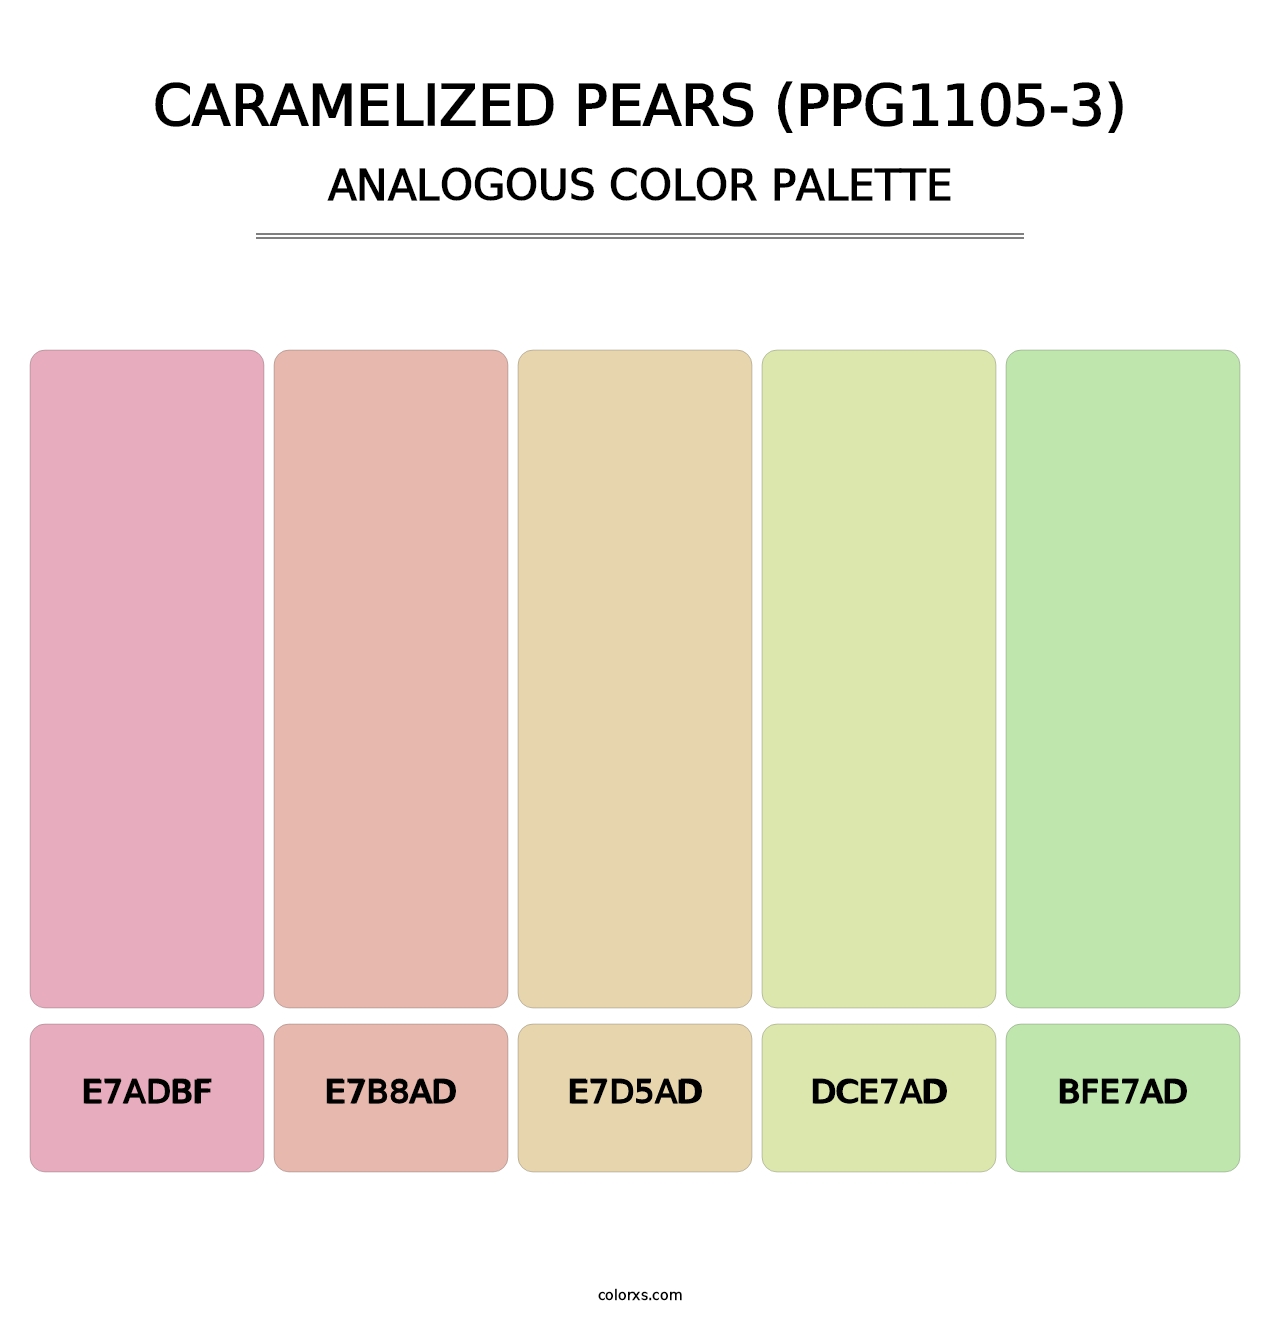 Caramelized Pears (PPG1105-3) - Analogous Color Palette